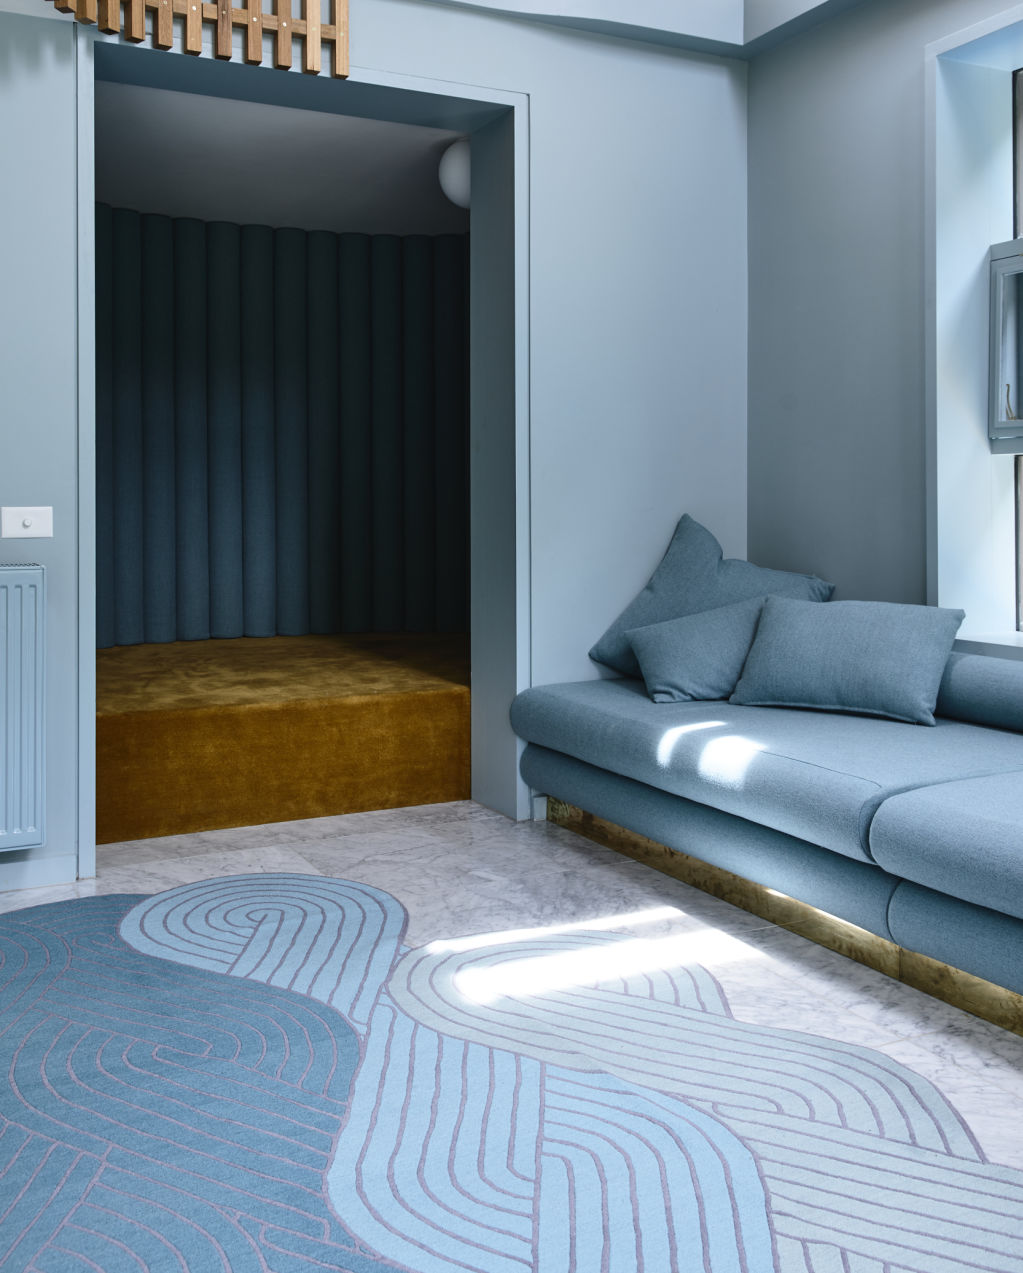 Calming blues are used to perfect effect at Erskine House by Kennedy Nolan. Photo: Derek Swalwell